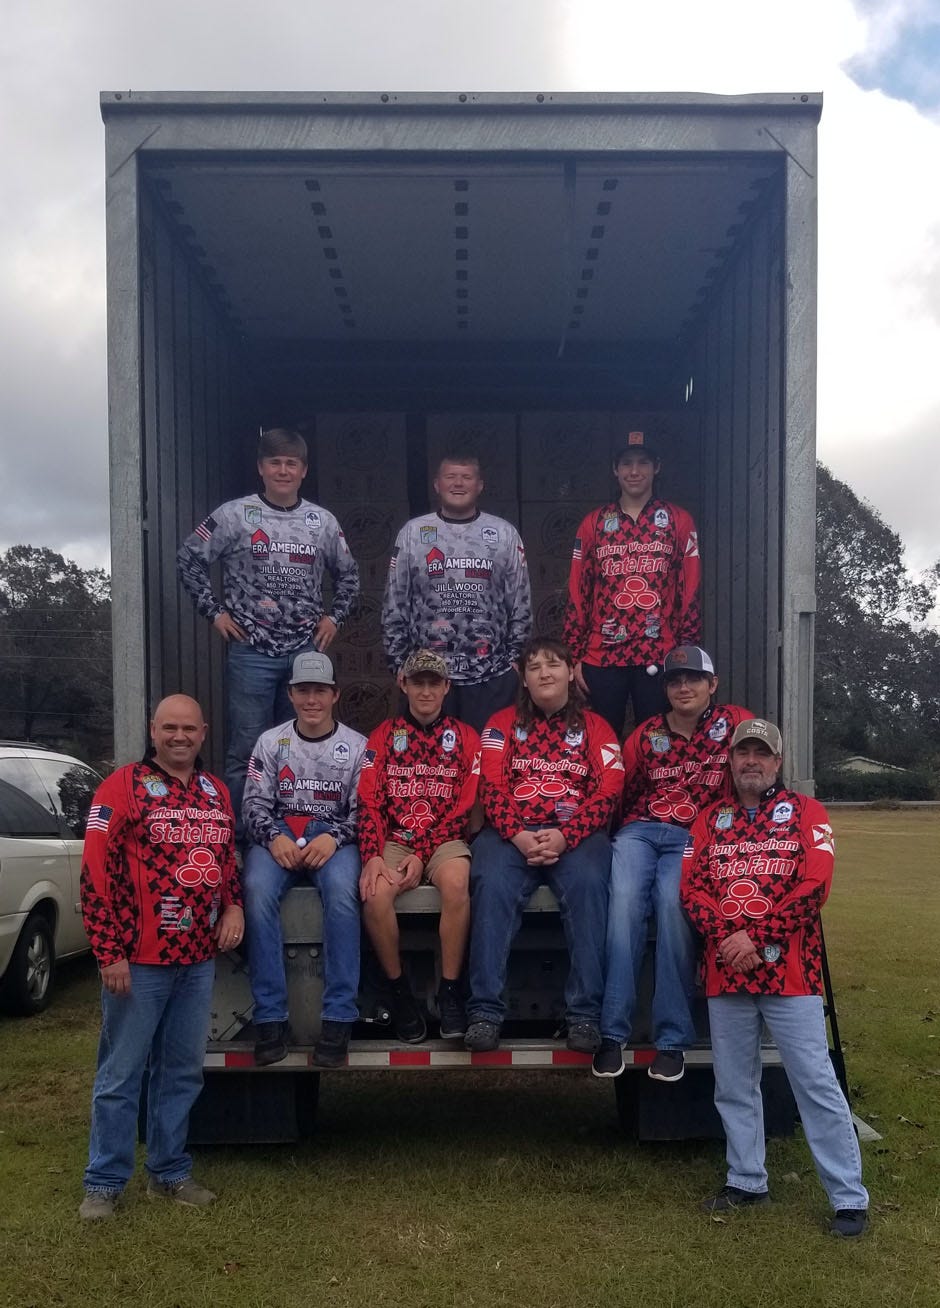 The teams in the Okaloosa and Walton County region were happy to reach their goal of 10,000 boxes donated to the Operation Christmas Child program. The Emerald Coast Youth Bassmasters helped load the semi for delivery, as well as said prayers over the boxes before they were loaded.